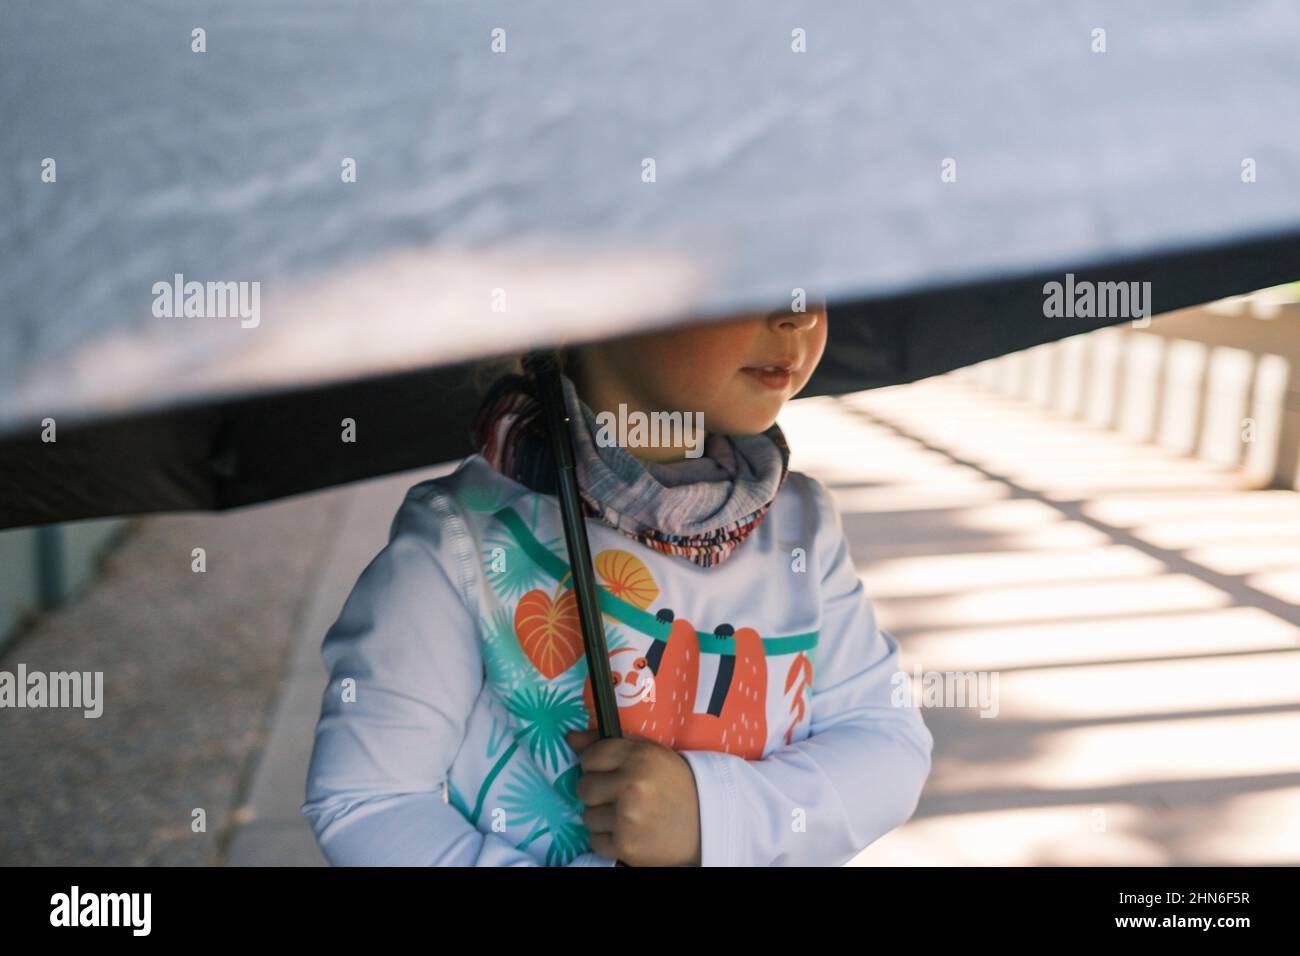 Child holding an umbrella for sun protection Stock Photo